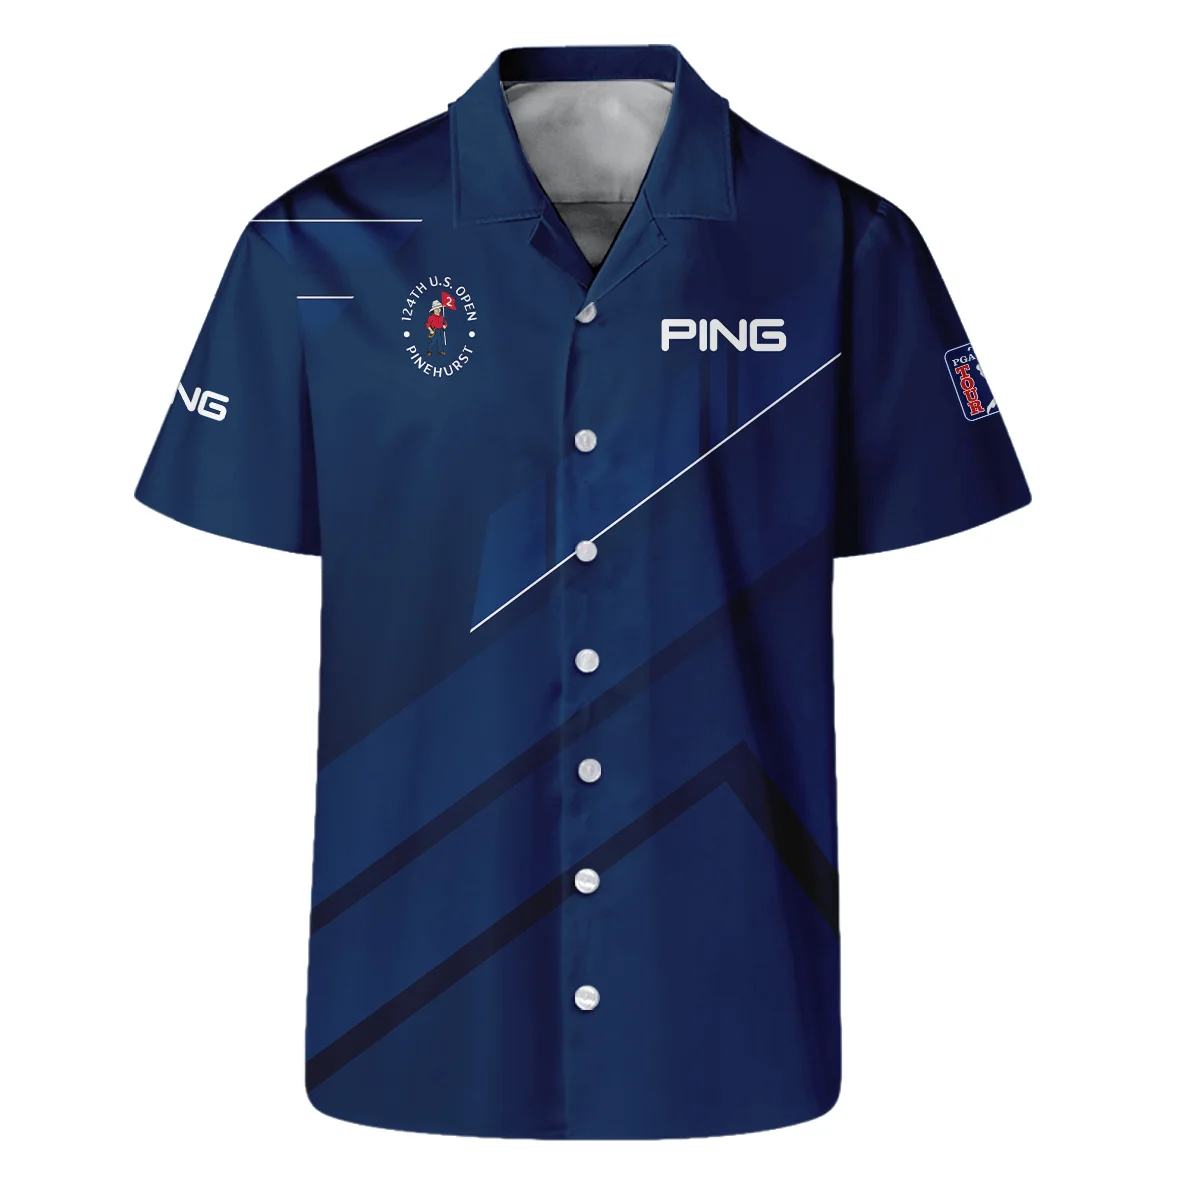 Ping 124th U.S. Open Pinehurst Blue Gradient With White Straight Line Vneck Long Polo Shirt Style Classic Long Polo Shirt For Men